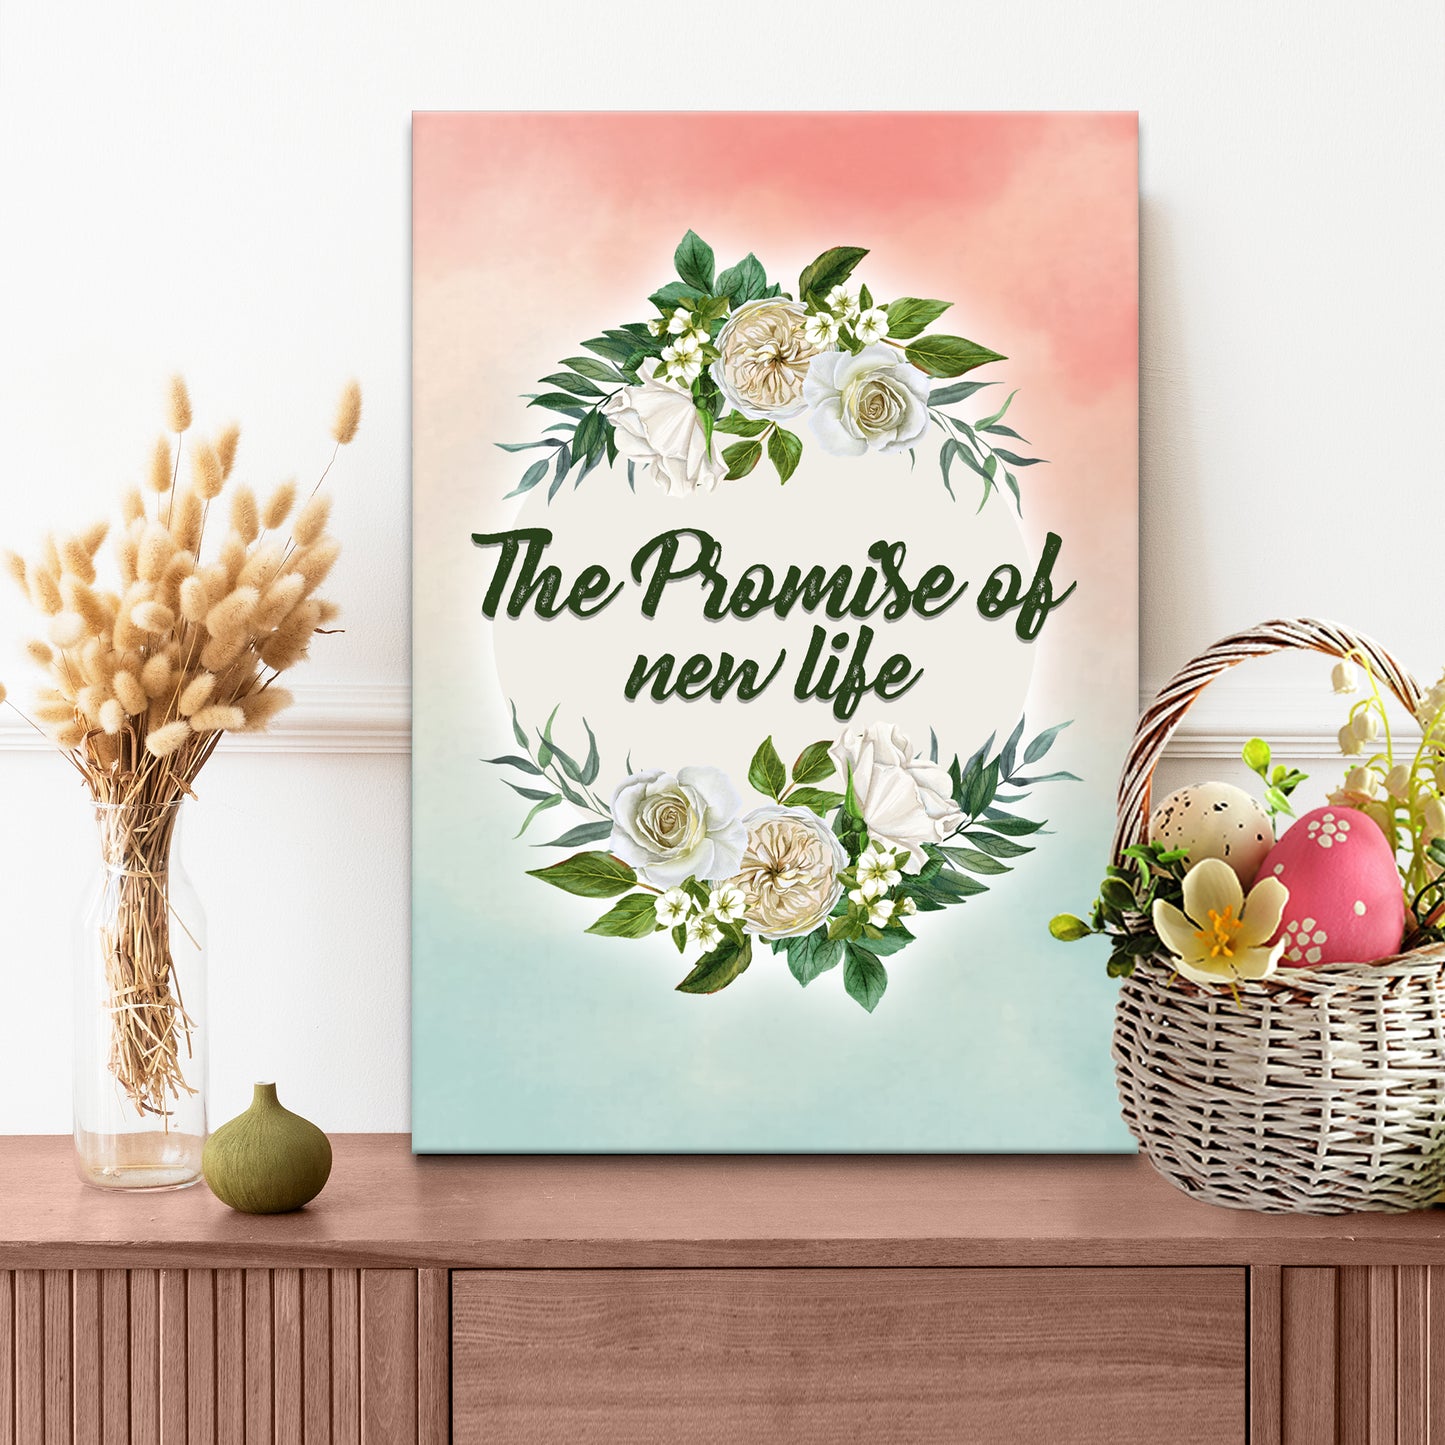 The Promise of New Life Sign - Image by Tailored Canvases